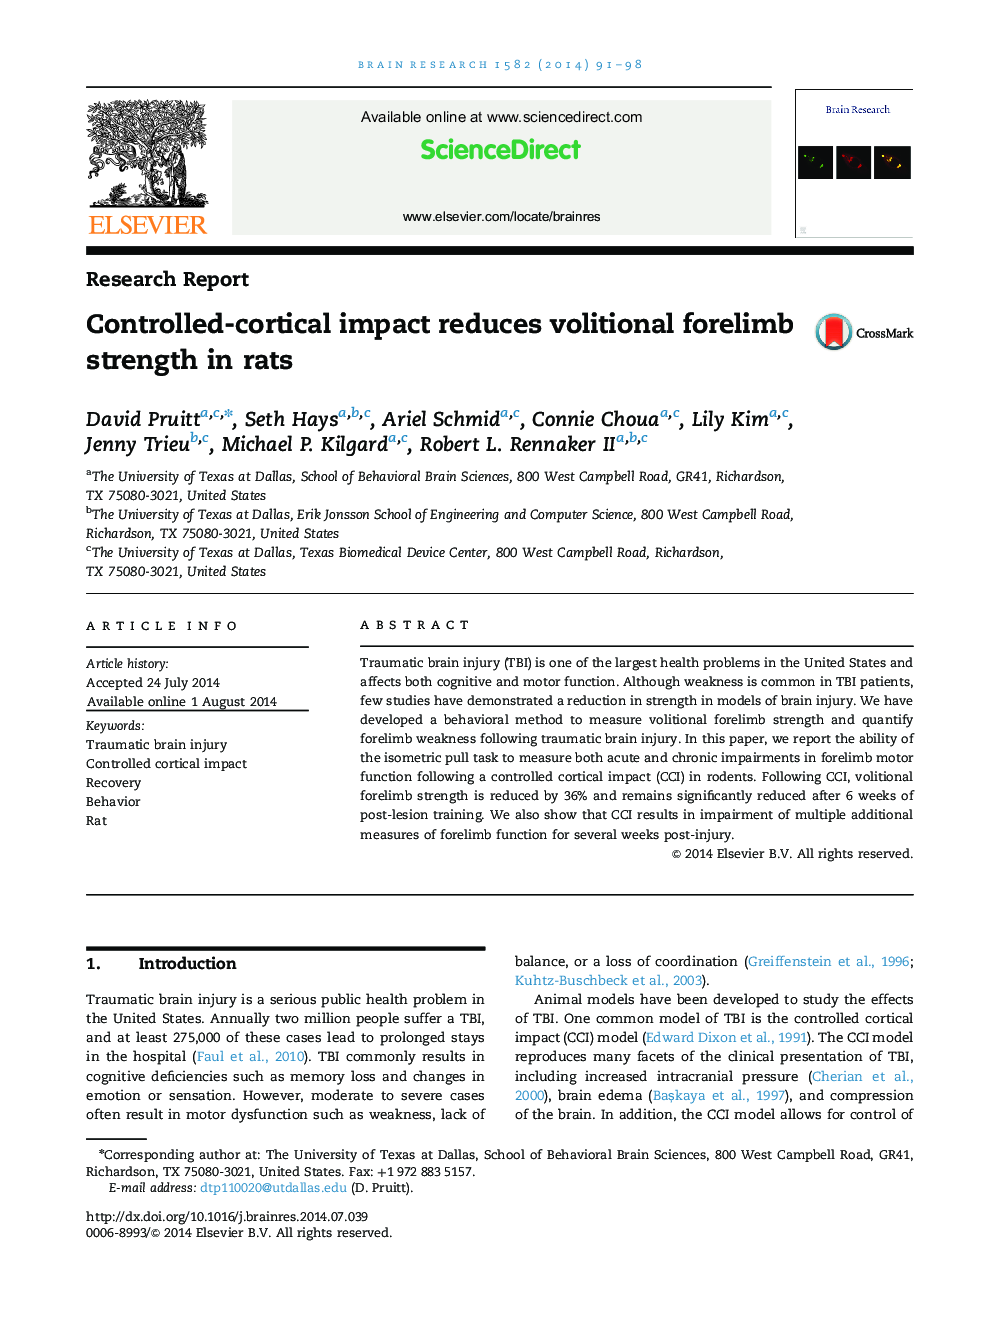 Controlled-cortical impact reduces volitional forelimb strength in rats